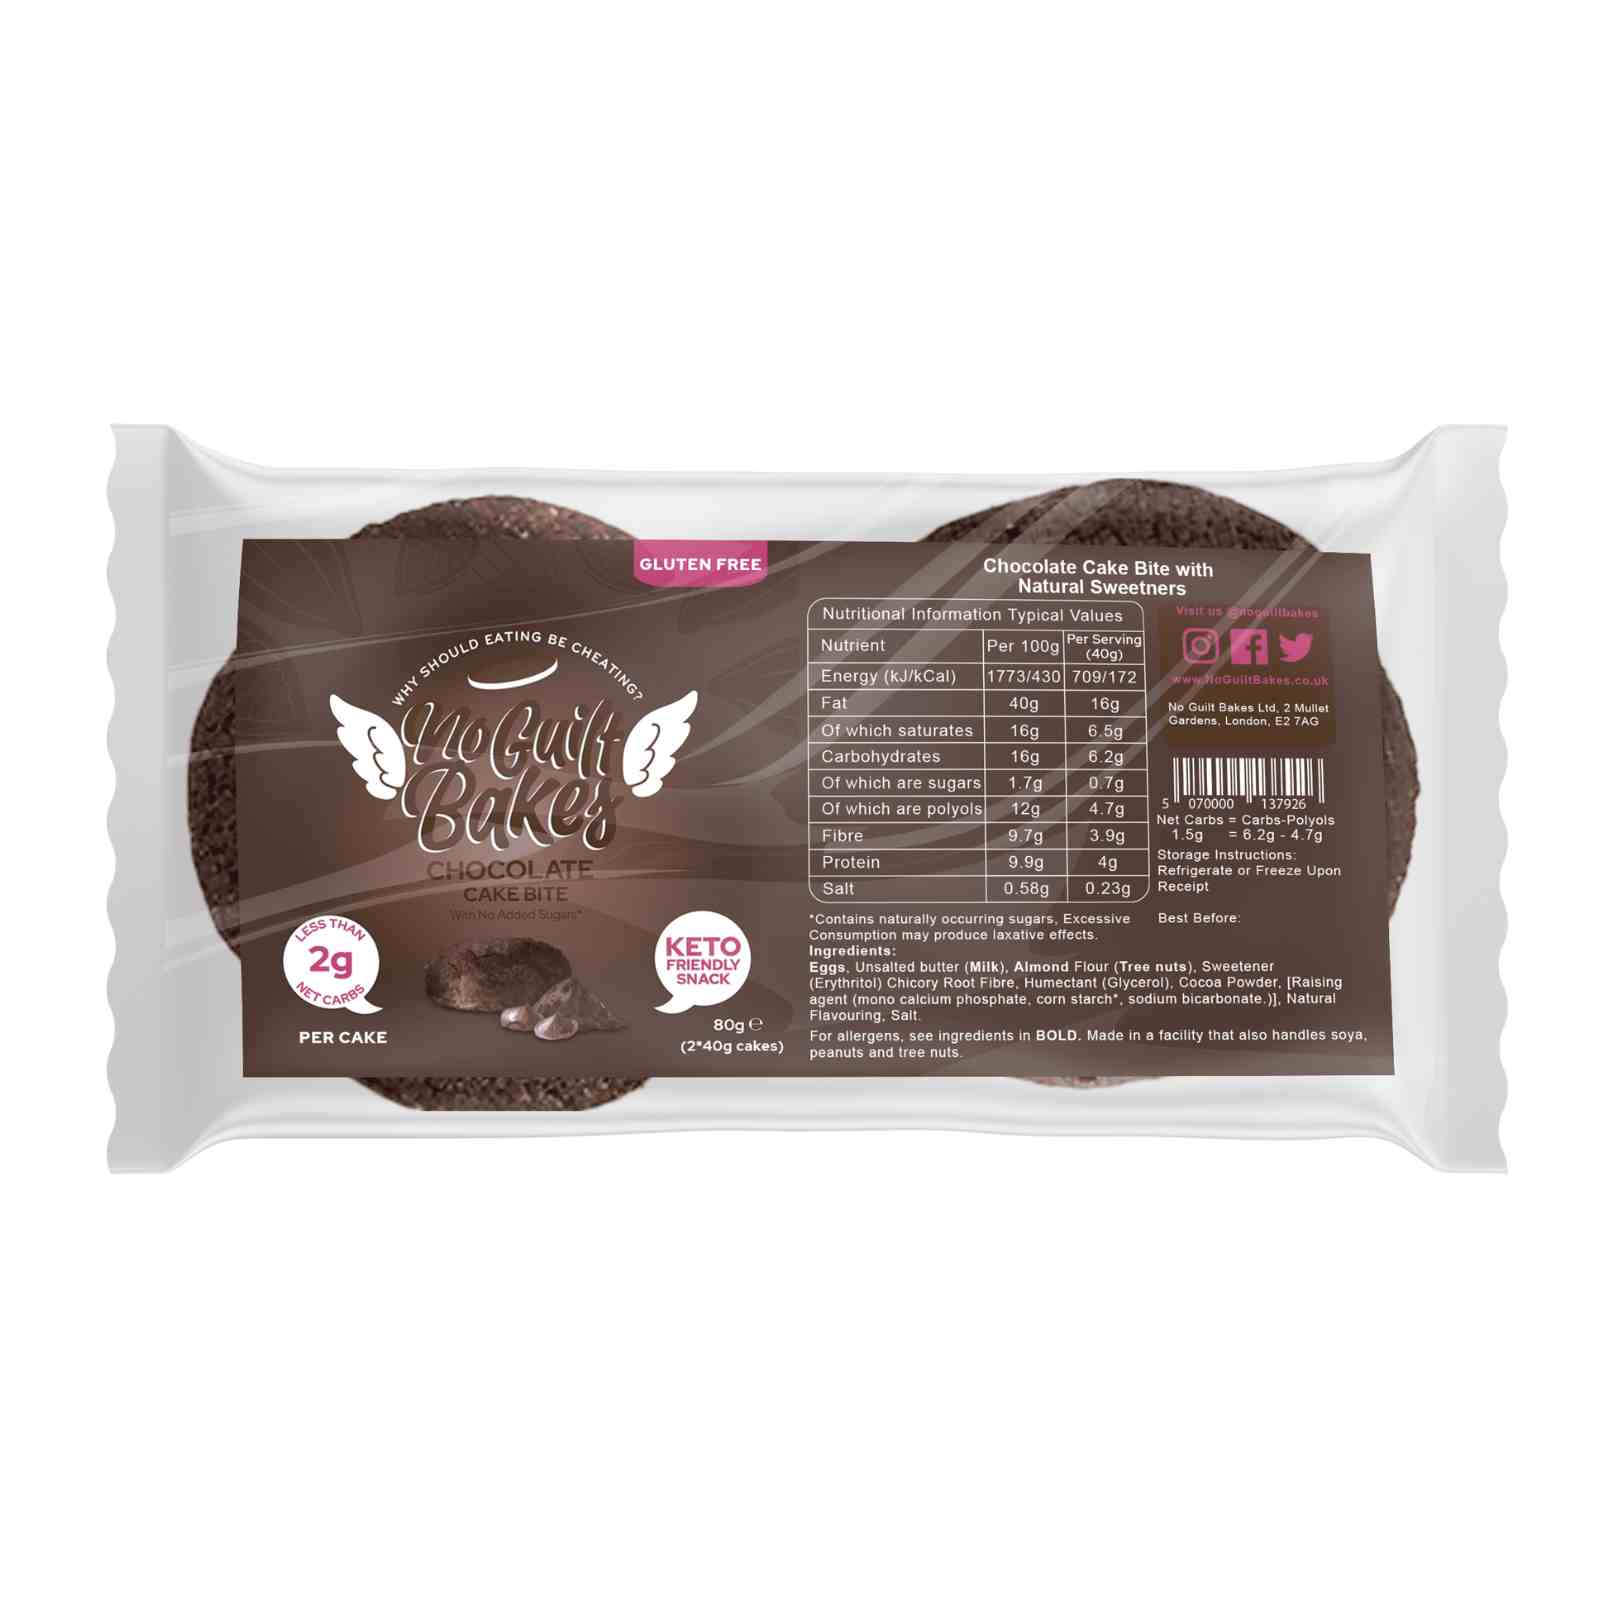 A package of No Guilt Bakes Chocolate Keto Cake Bites (Duo Pack) on a white background.